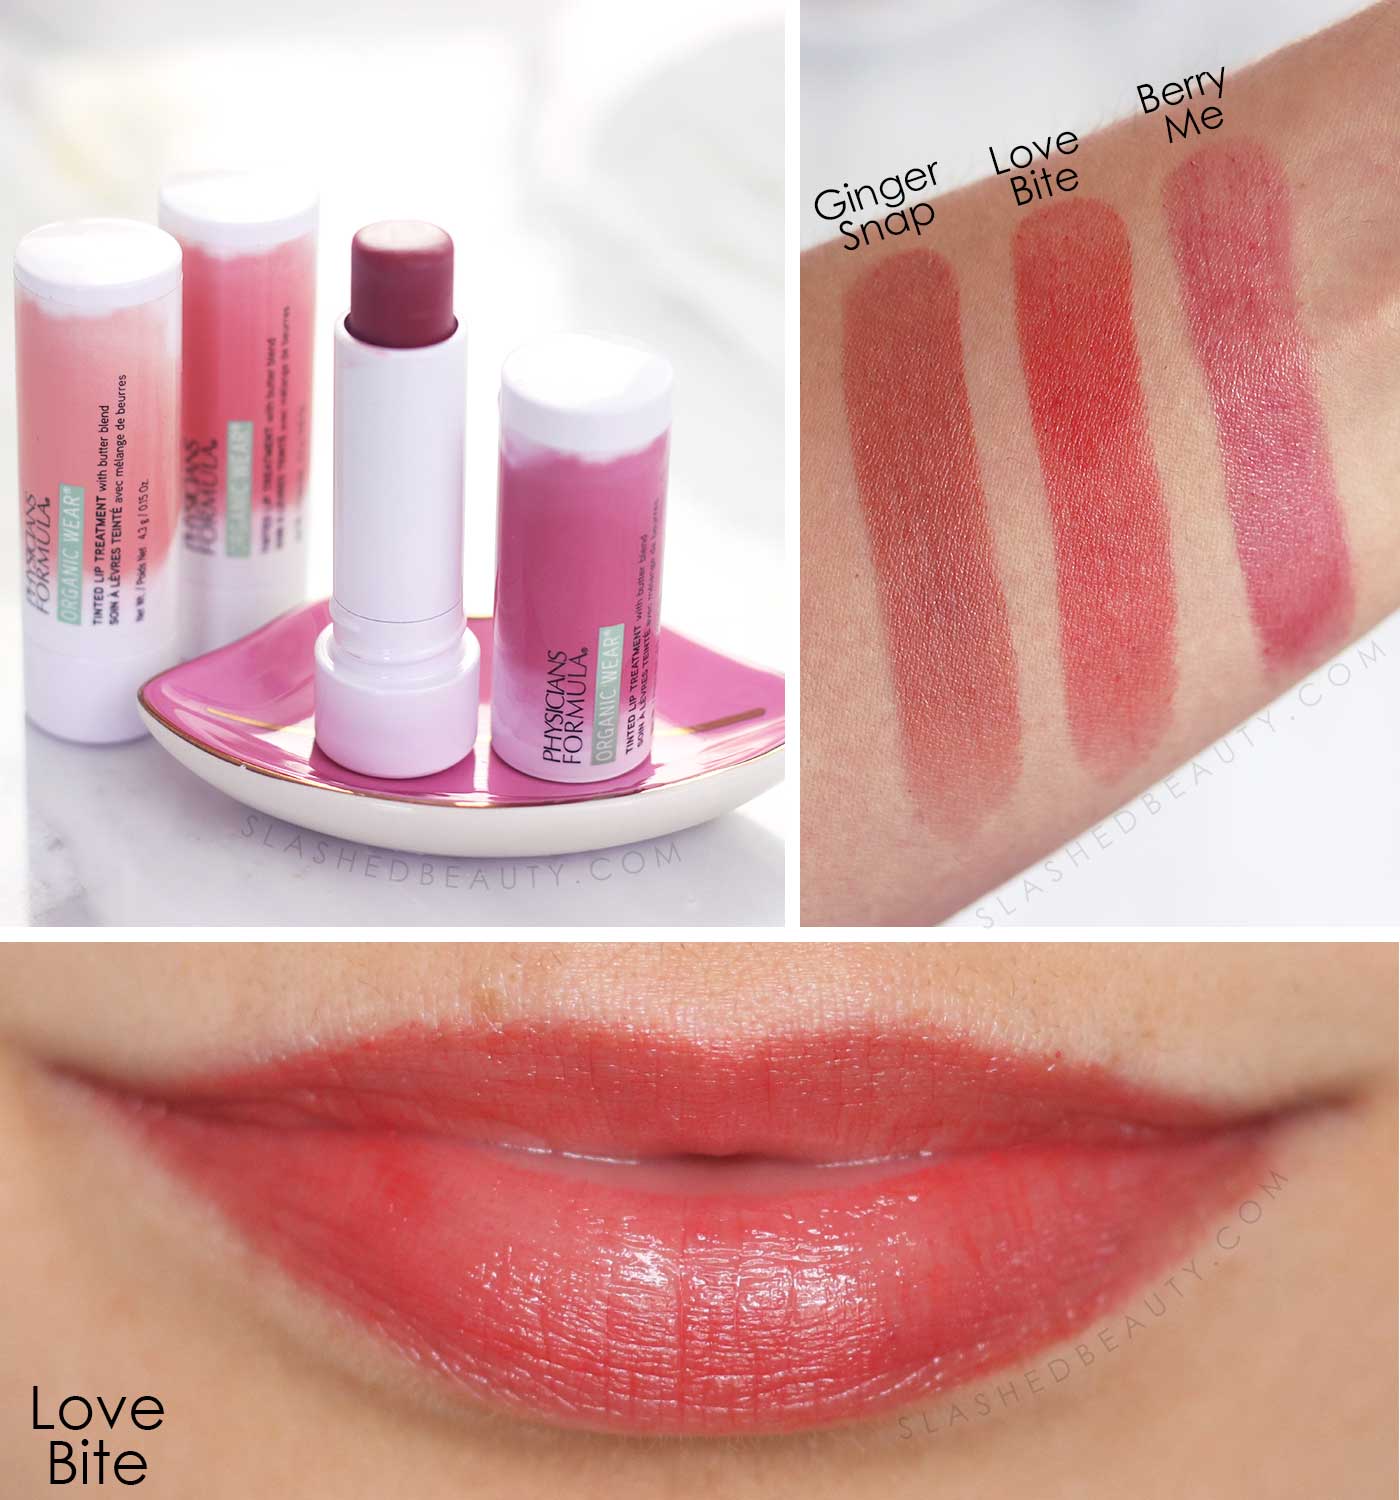 Physicians Formula Tinted Lip Treatment Swatches | Ginger Snap, Love Bite, Berry Me | 5 Best Drugstore Tinted Lip Balms | Slashed Beauty